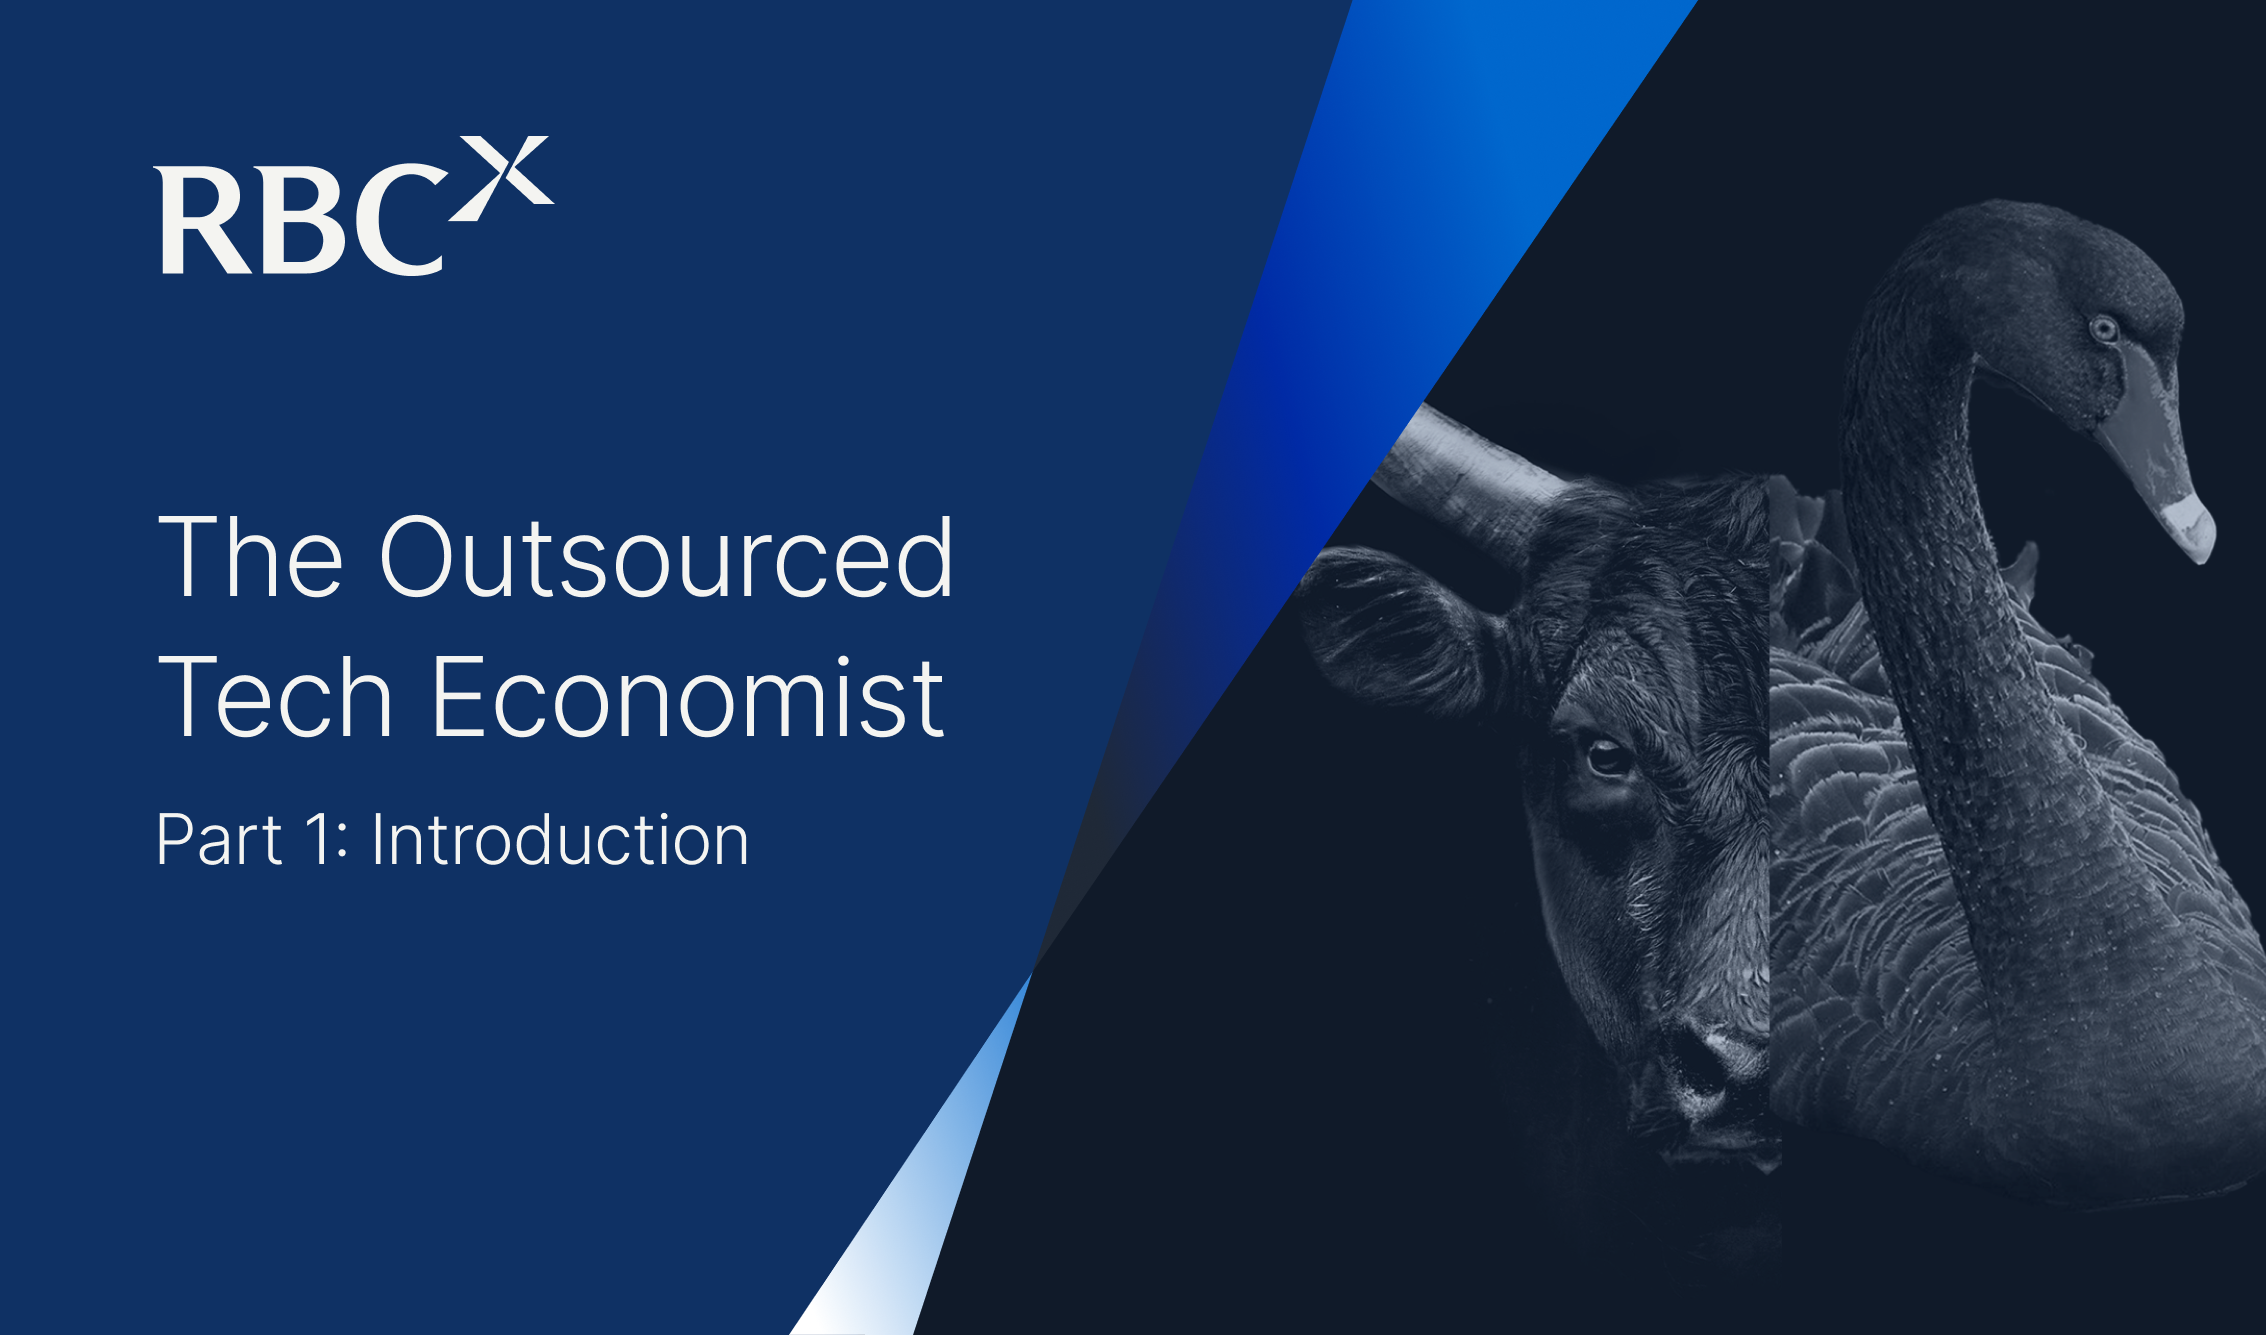 The Outsourced Tech Economist: How a black-swan bull upended the tech ecosystem (Part 1)